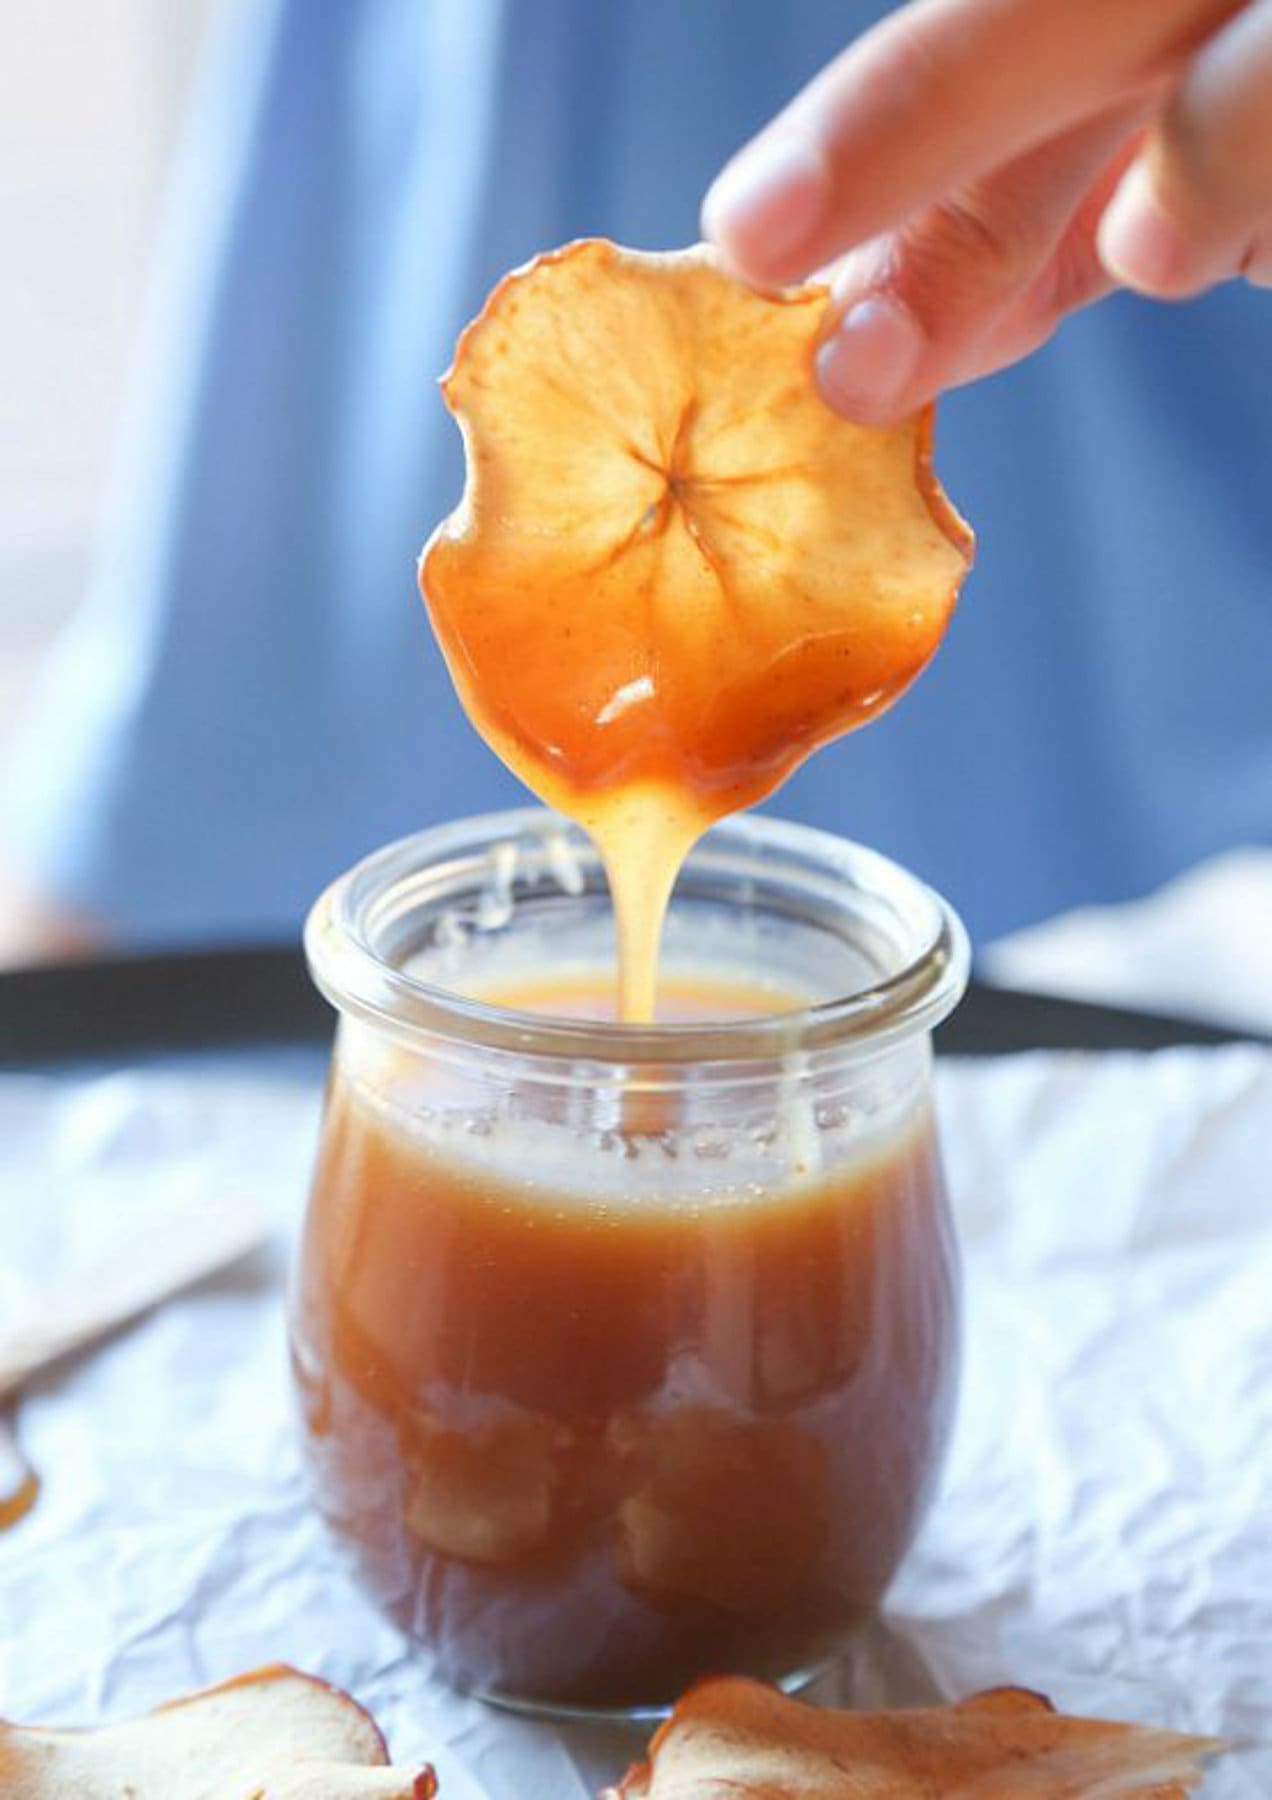 A dried apple slice being dipped in a jar of caramel sauce